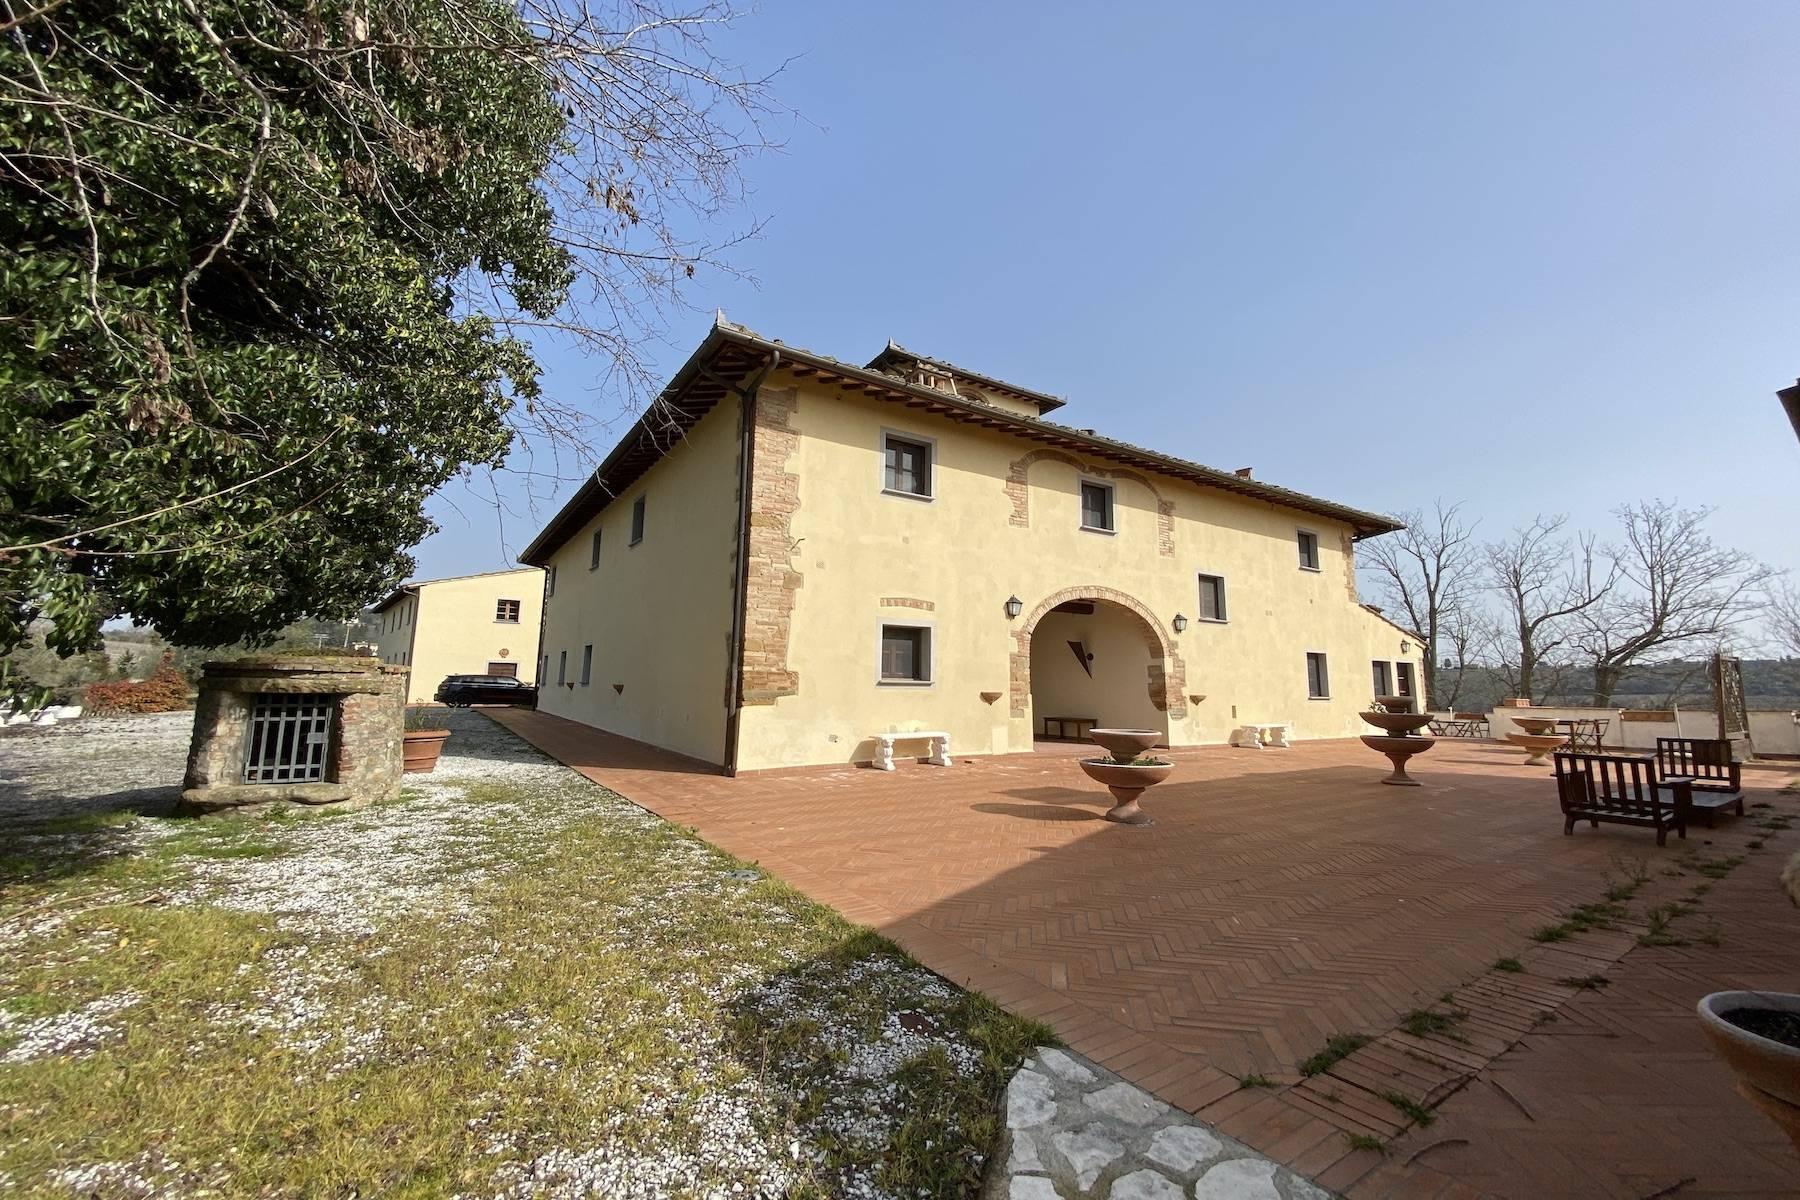 Remarkable 102 hectares wine estate in the heart of Chianti - 19